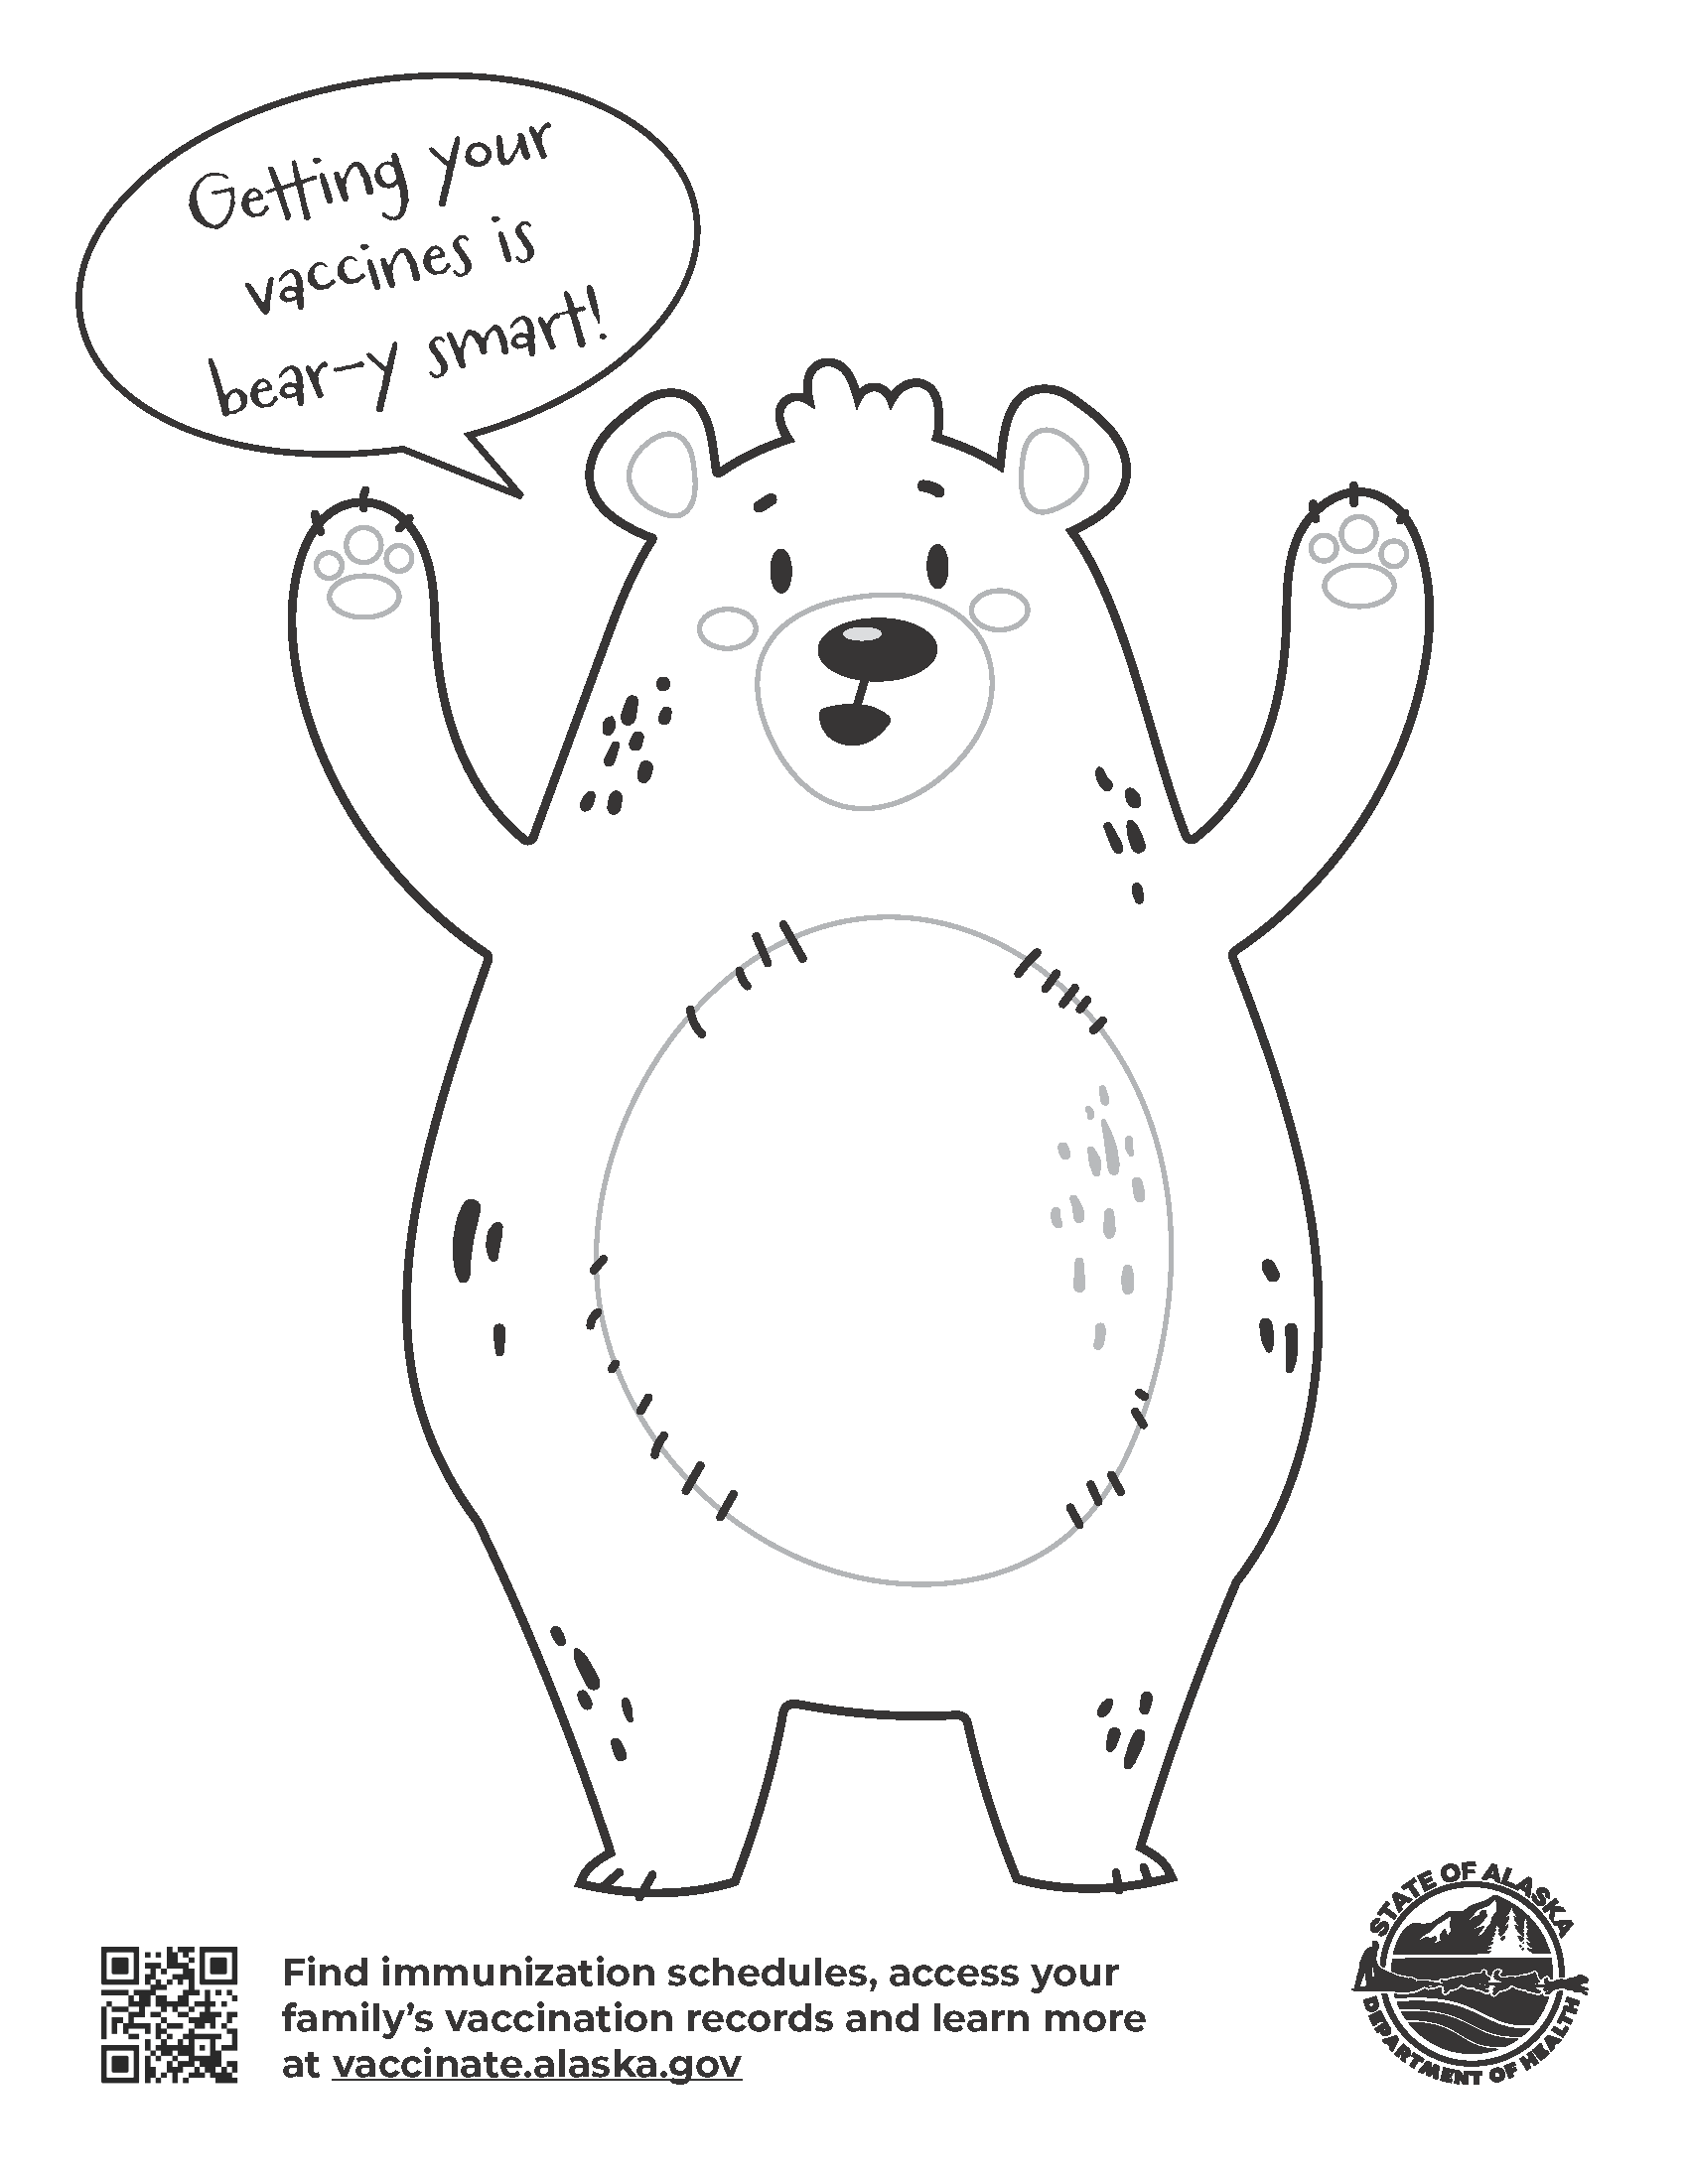 Getting your vaccines is bear-y smart! vaccination coloring sheet